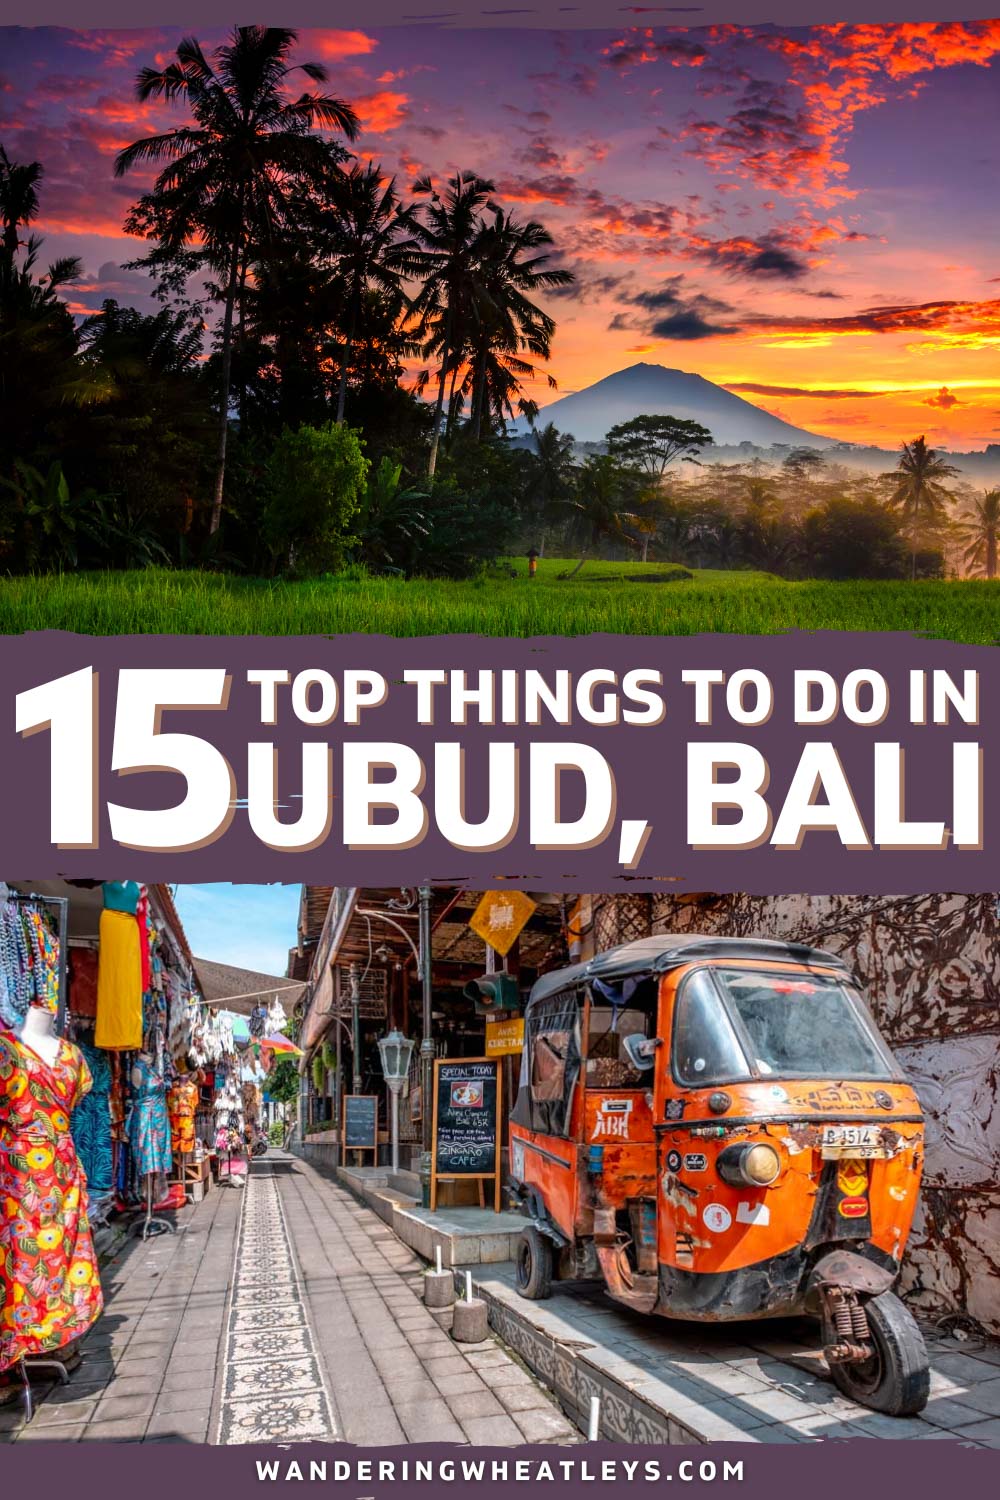 The Best Things to do in Ubud, Bali